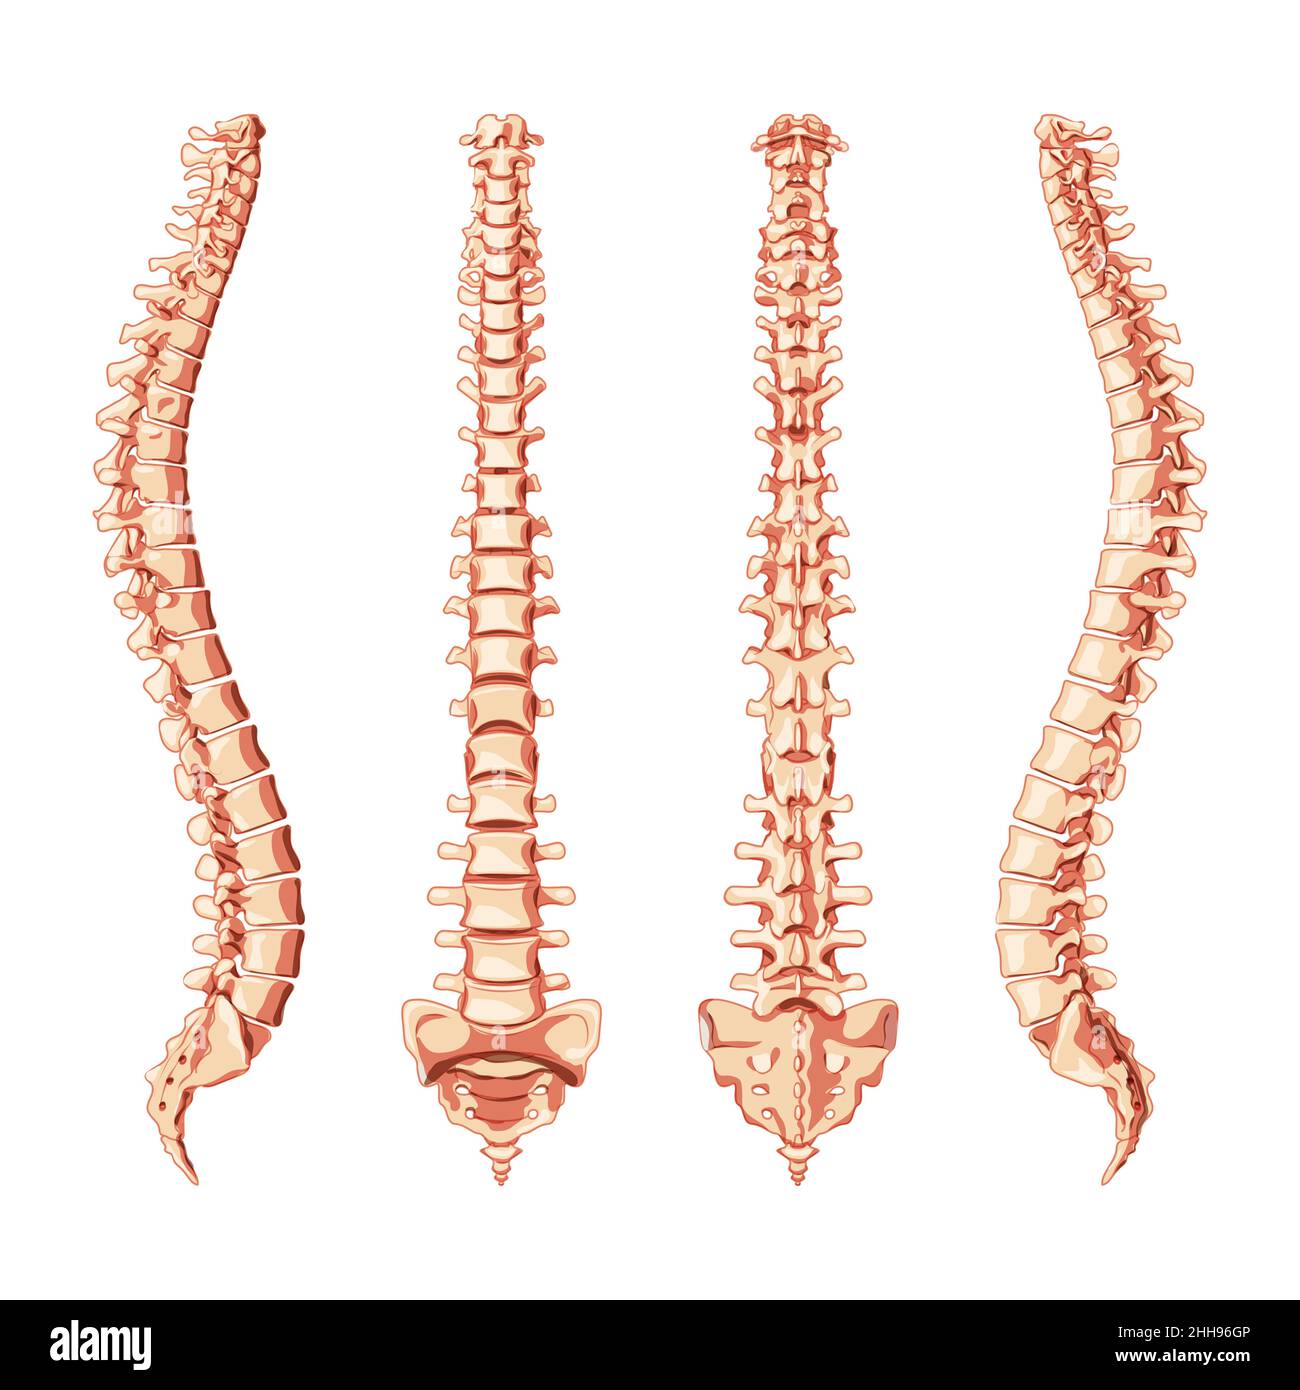 Human vertebral column in front, back, side. Vector flat realistic vertebrae groups cervical, thoracic, lumbar, sacrum and coccyx concept illustration in natural colors, spine isolated on white Stock Vector